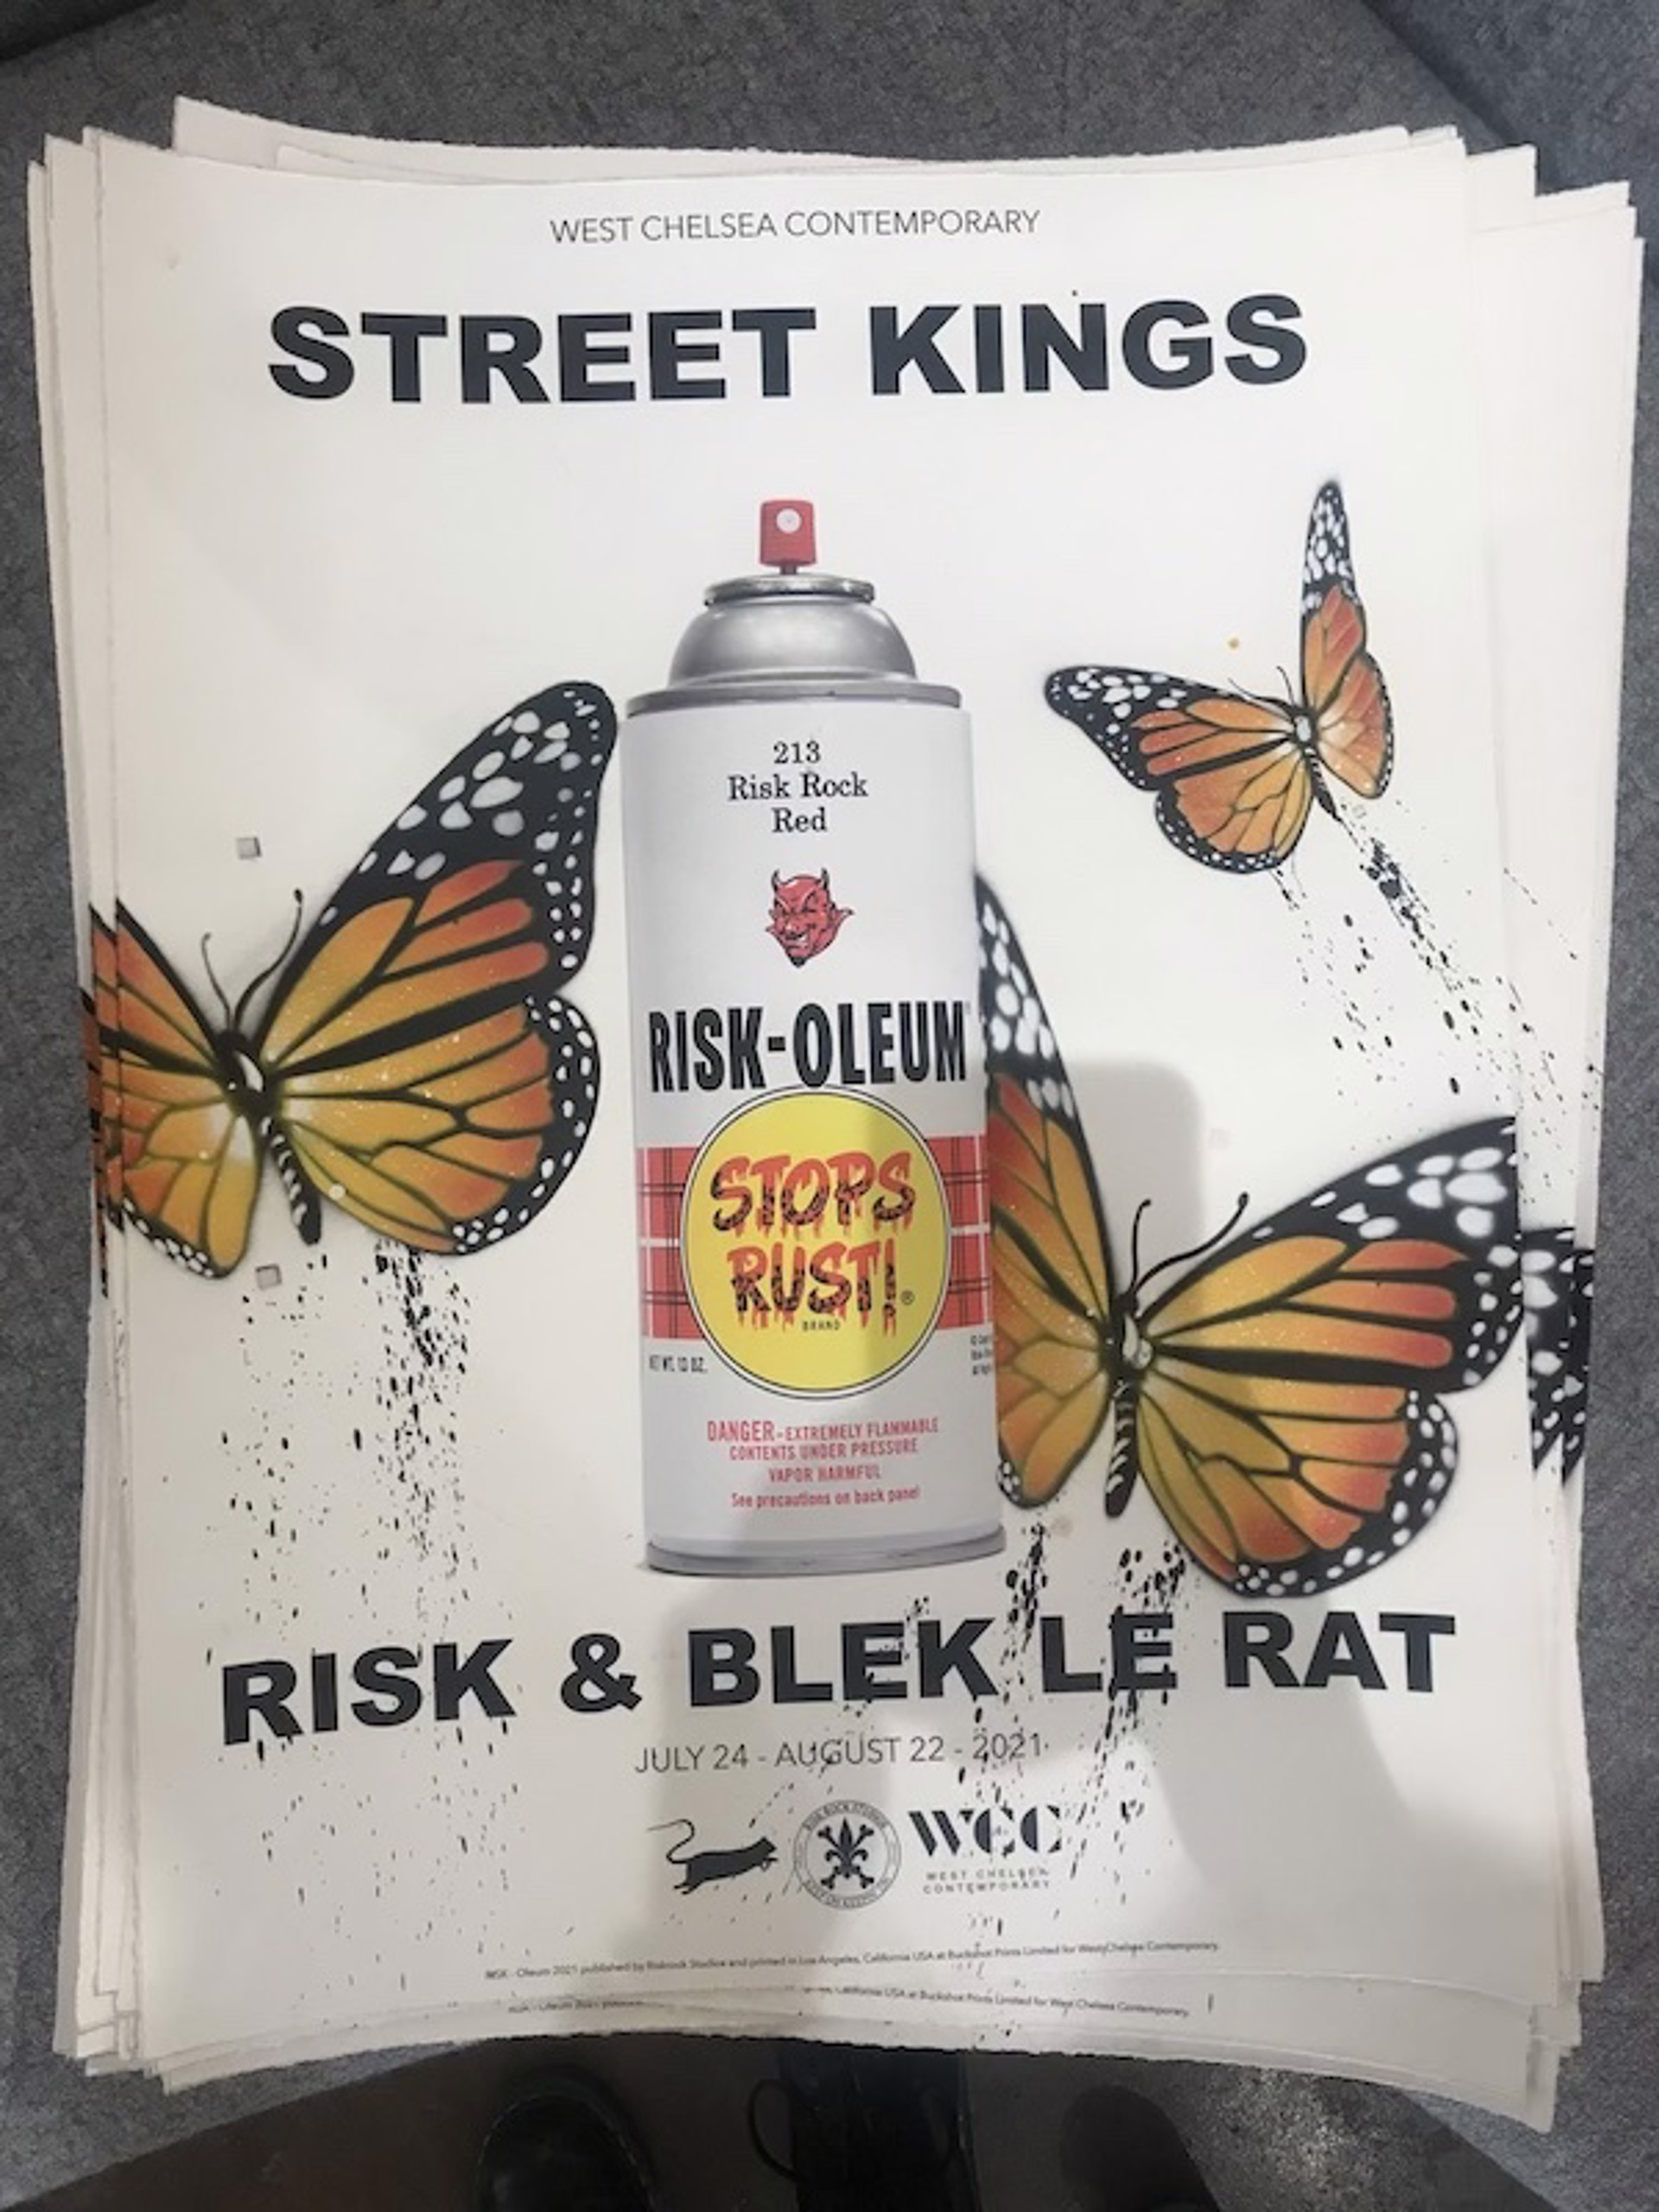 Street Kings Show Print (25/50) by Risk